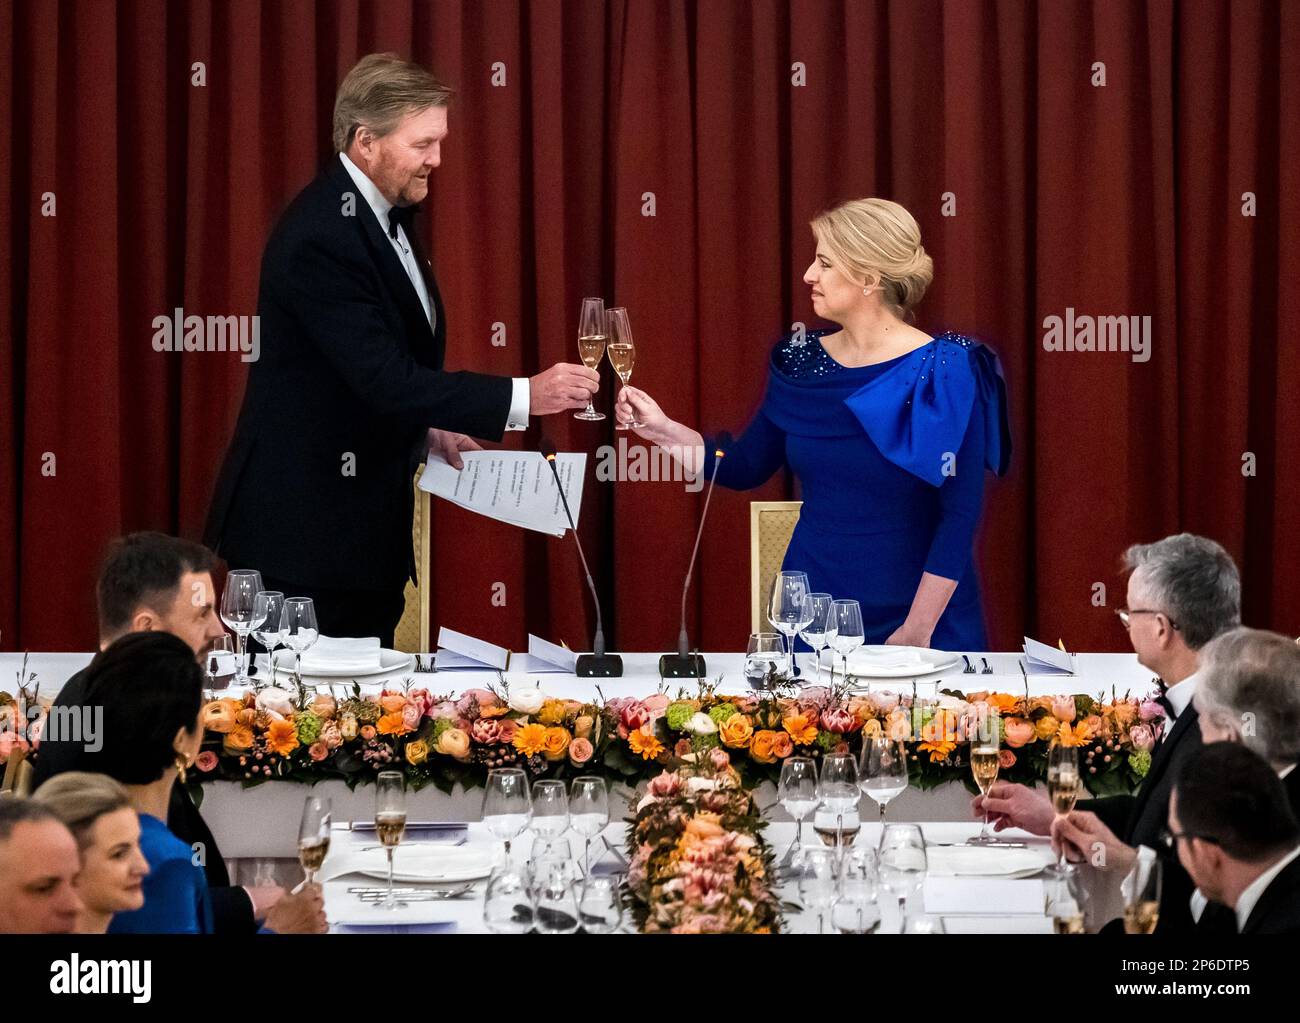 BRATISLAVA - King Willem-Alexander toasts during the state banquet on the first day of the three-day state visit to Slovakia. ANP REMKO DE WAAL netherlands out - belgium out Stock Photo